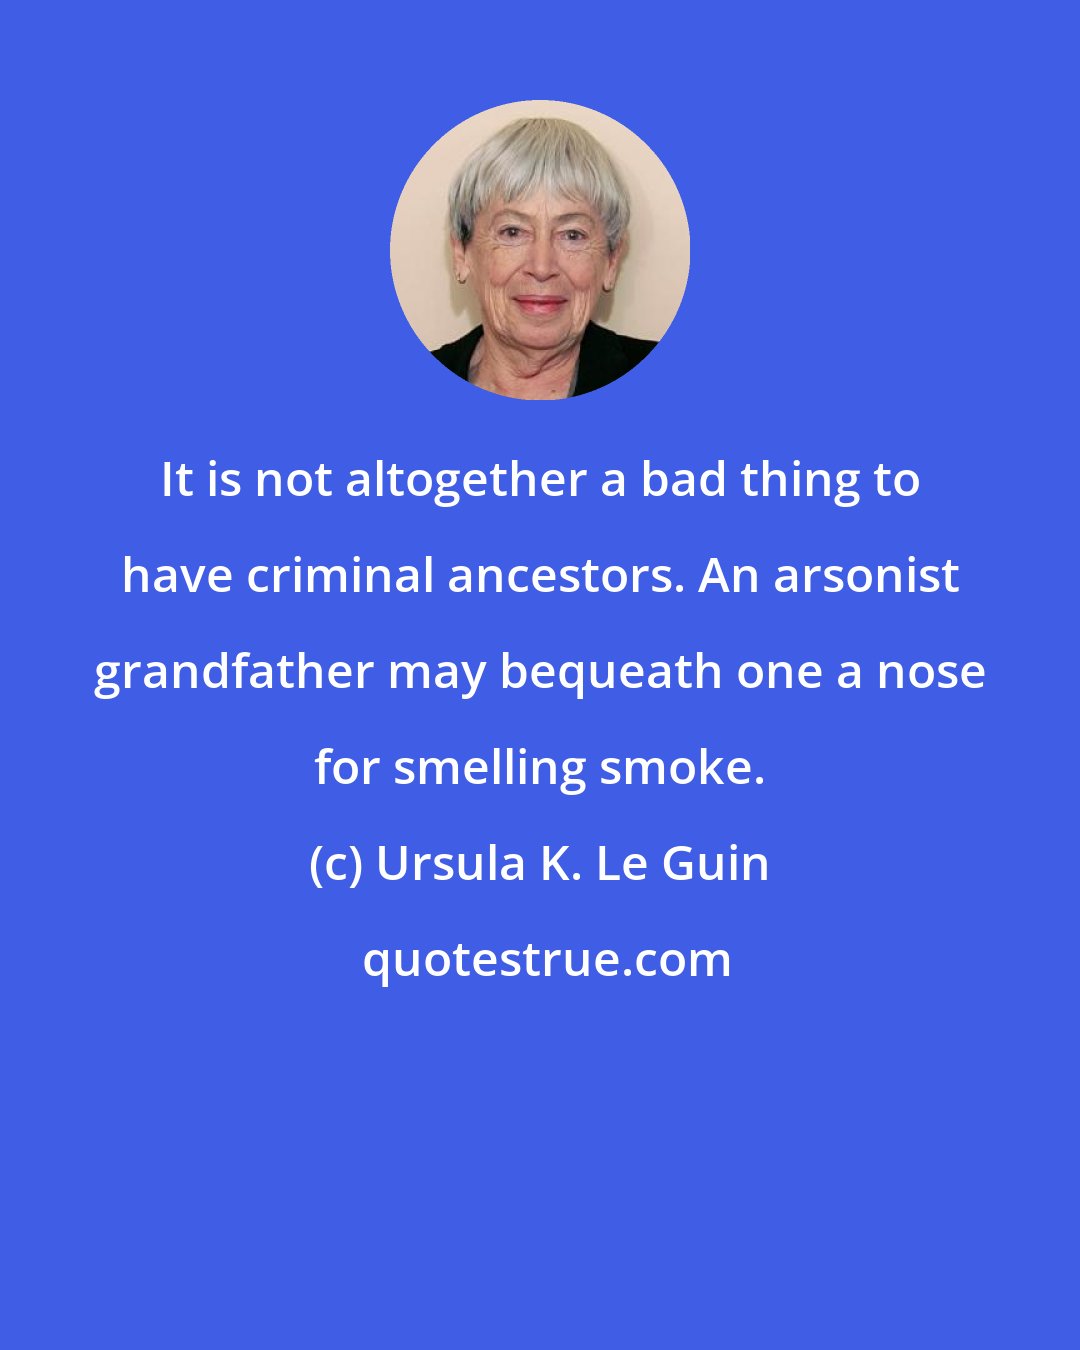 Ursula K. Le Guin: It is not altogether a bad thing to have criminal ancestors. An arsonist grandfather may bequeath one a nose for smelling smoke.